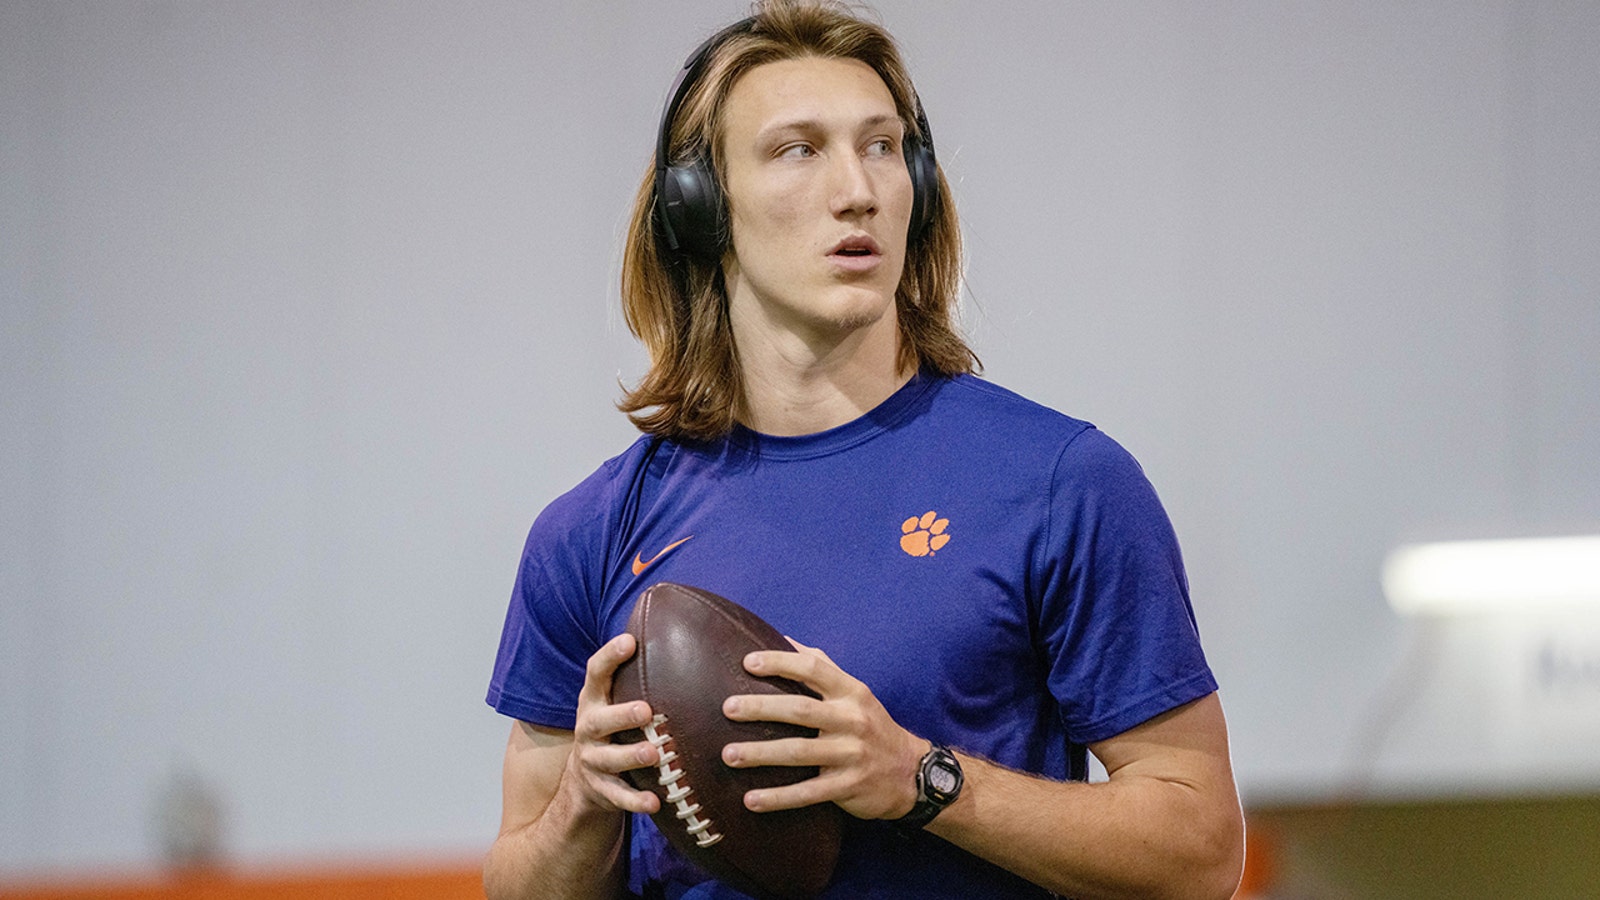 Michael Vick's thoughts on Trevor Lawrence's future with the Jaguars